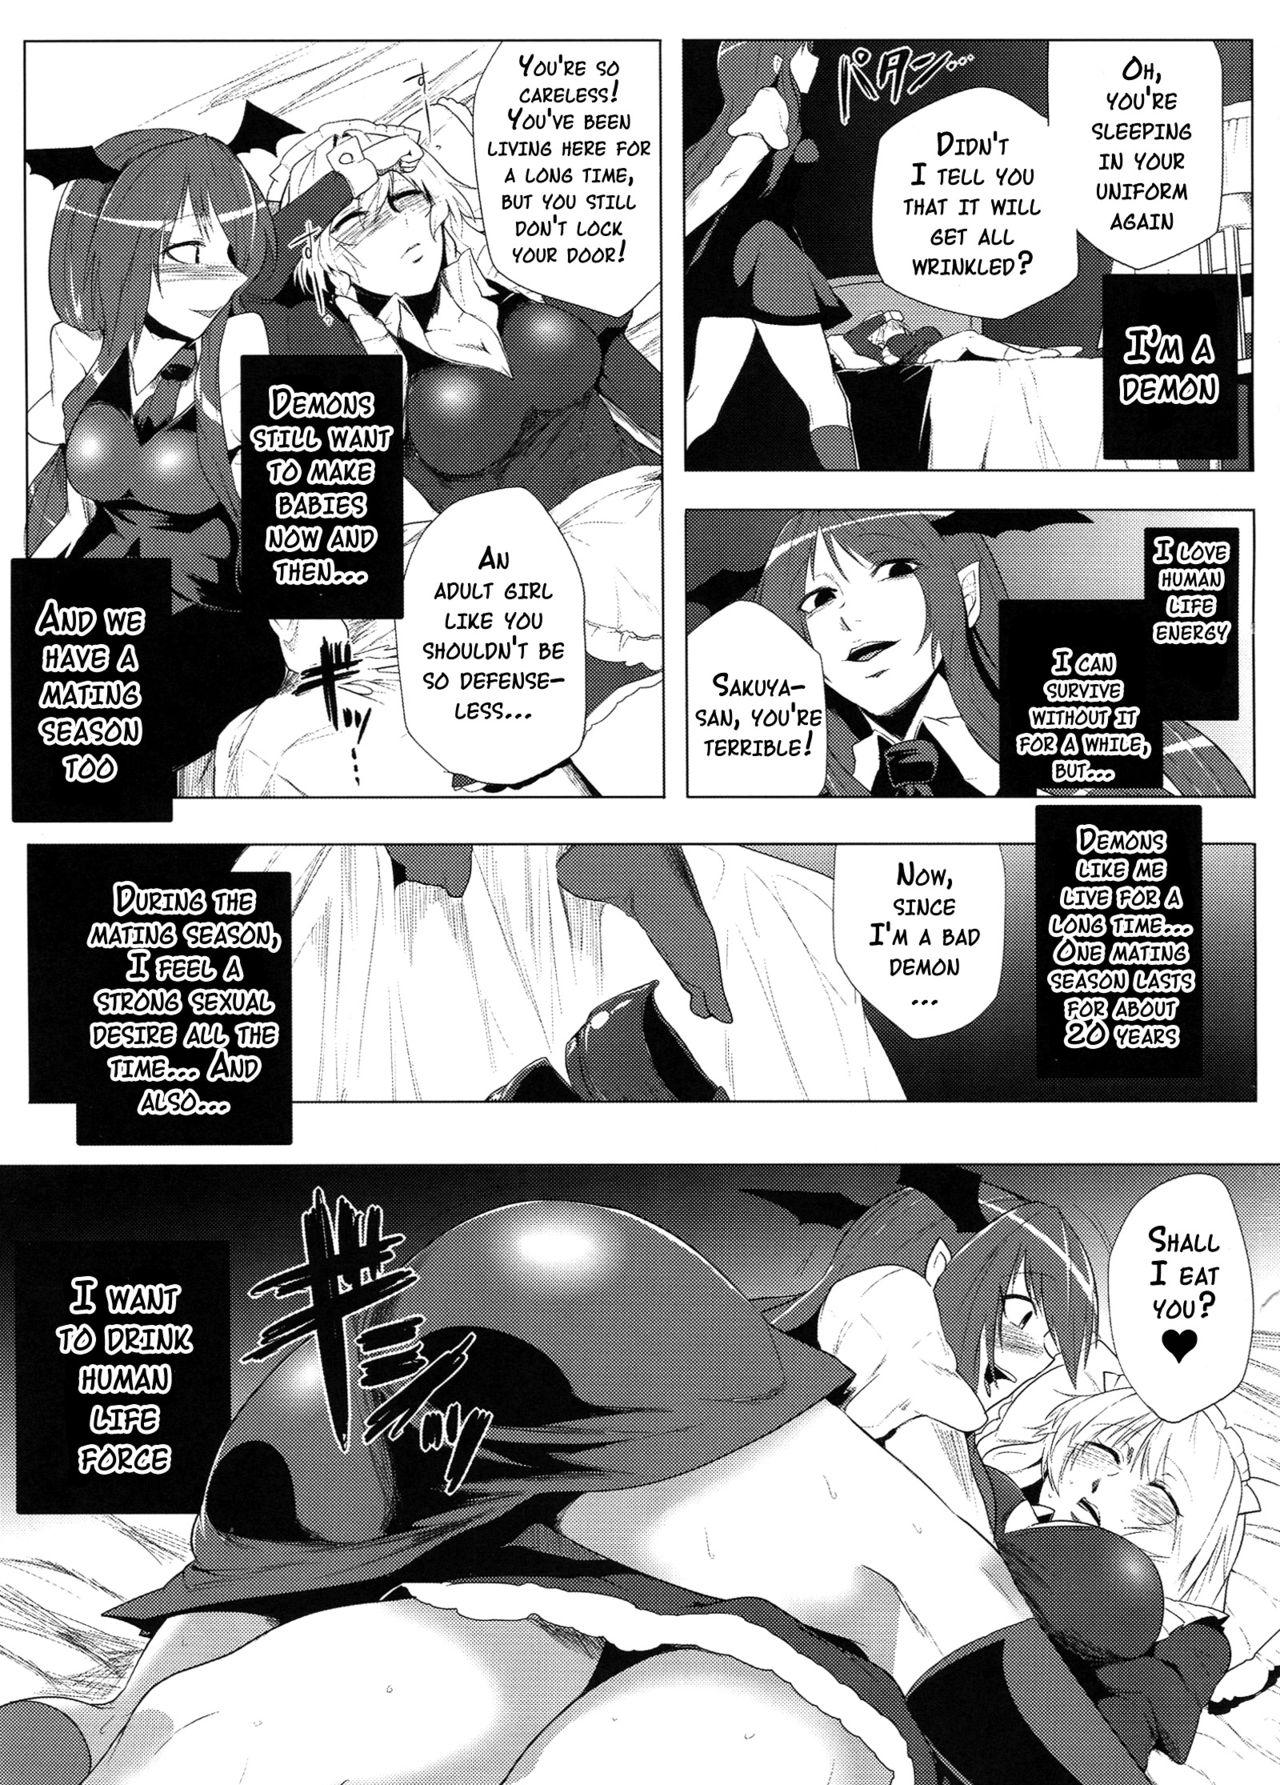 Swallowing THE BEGINNING OF THE END OF ETERNITY - Touhou project Cut - Page 8